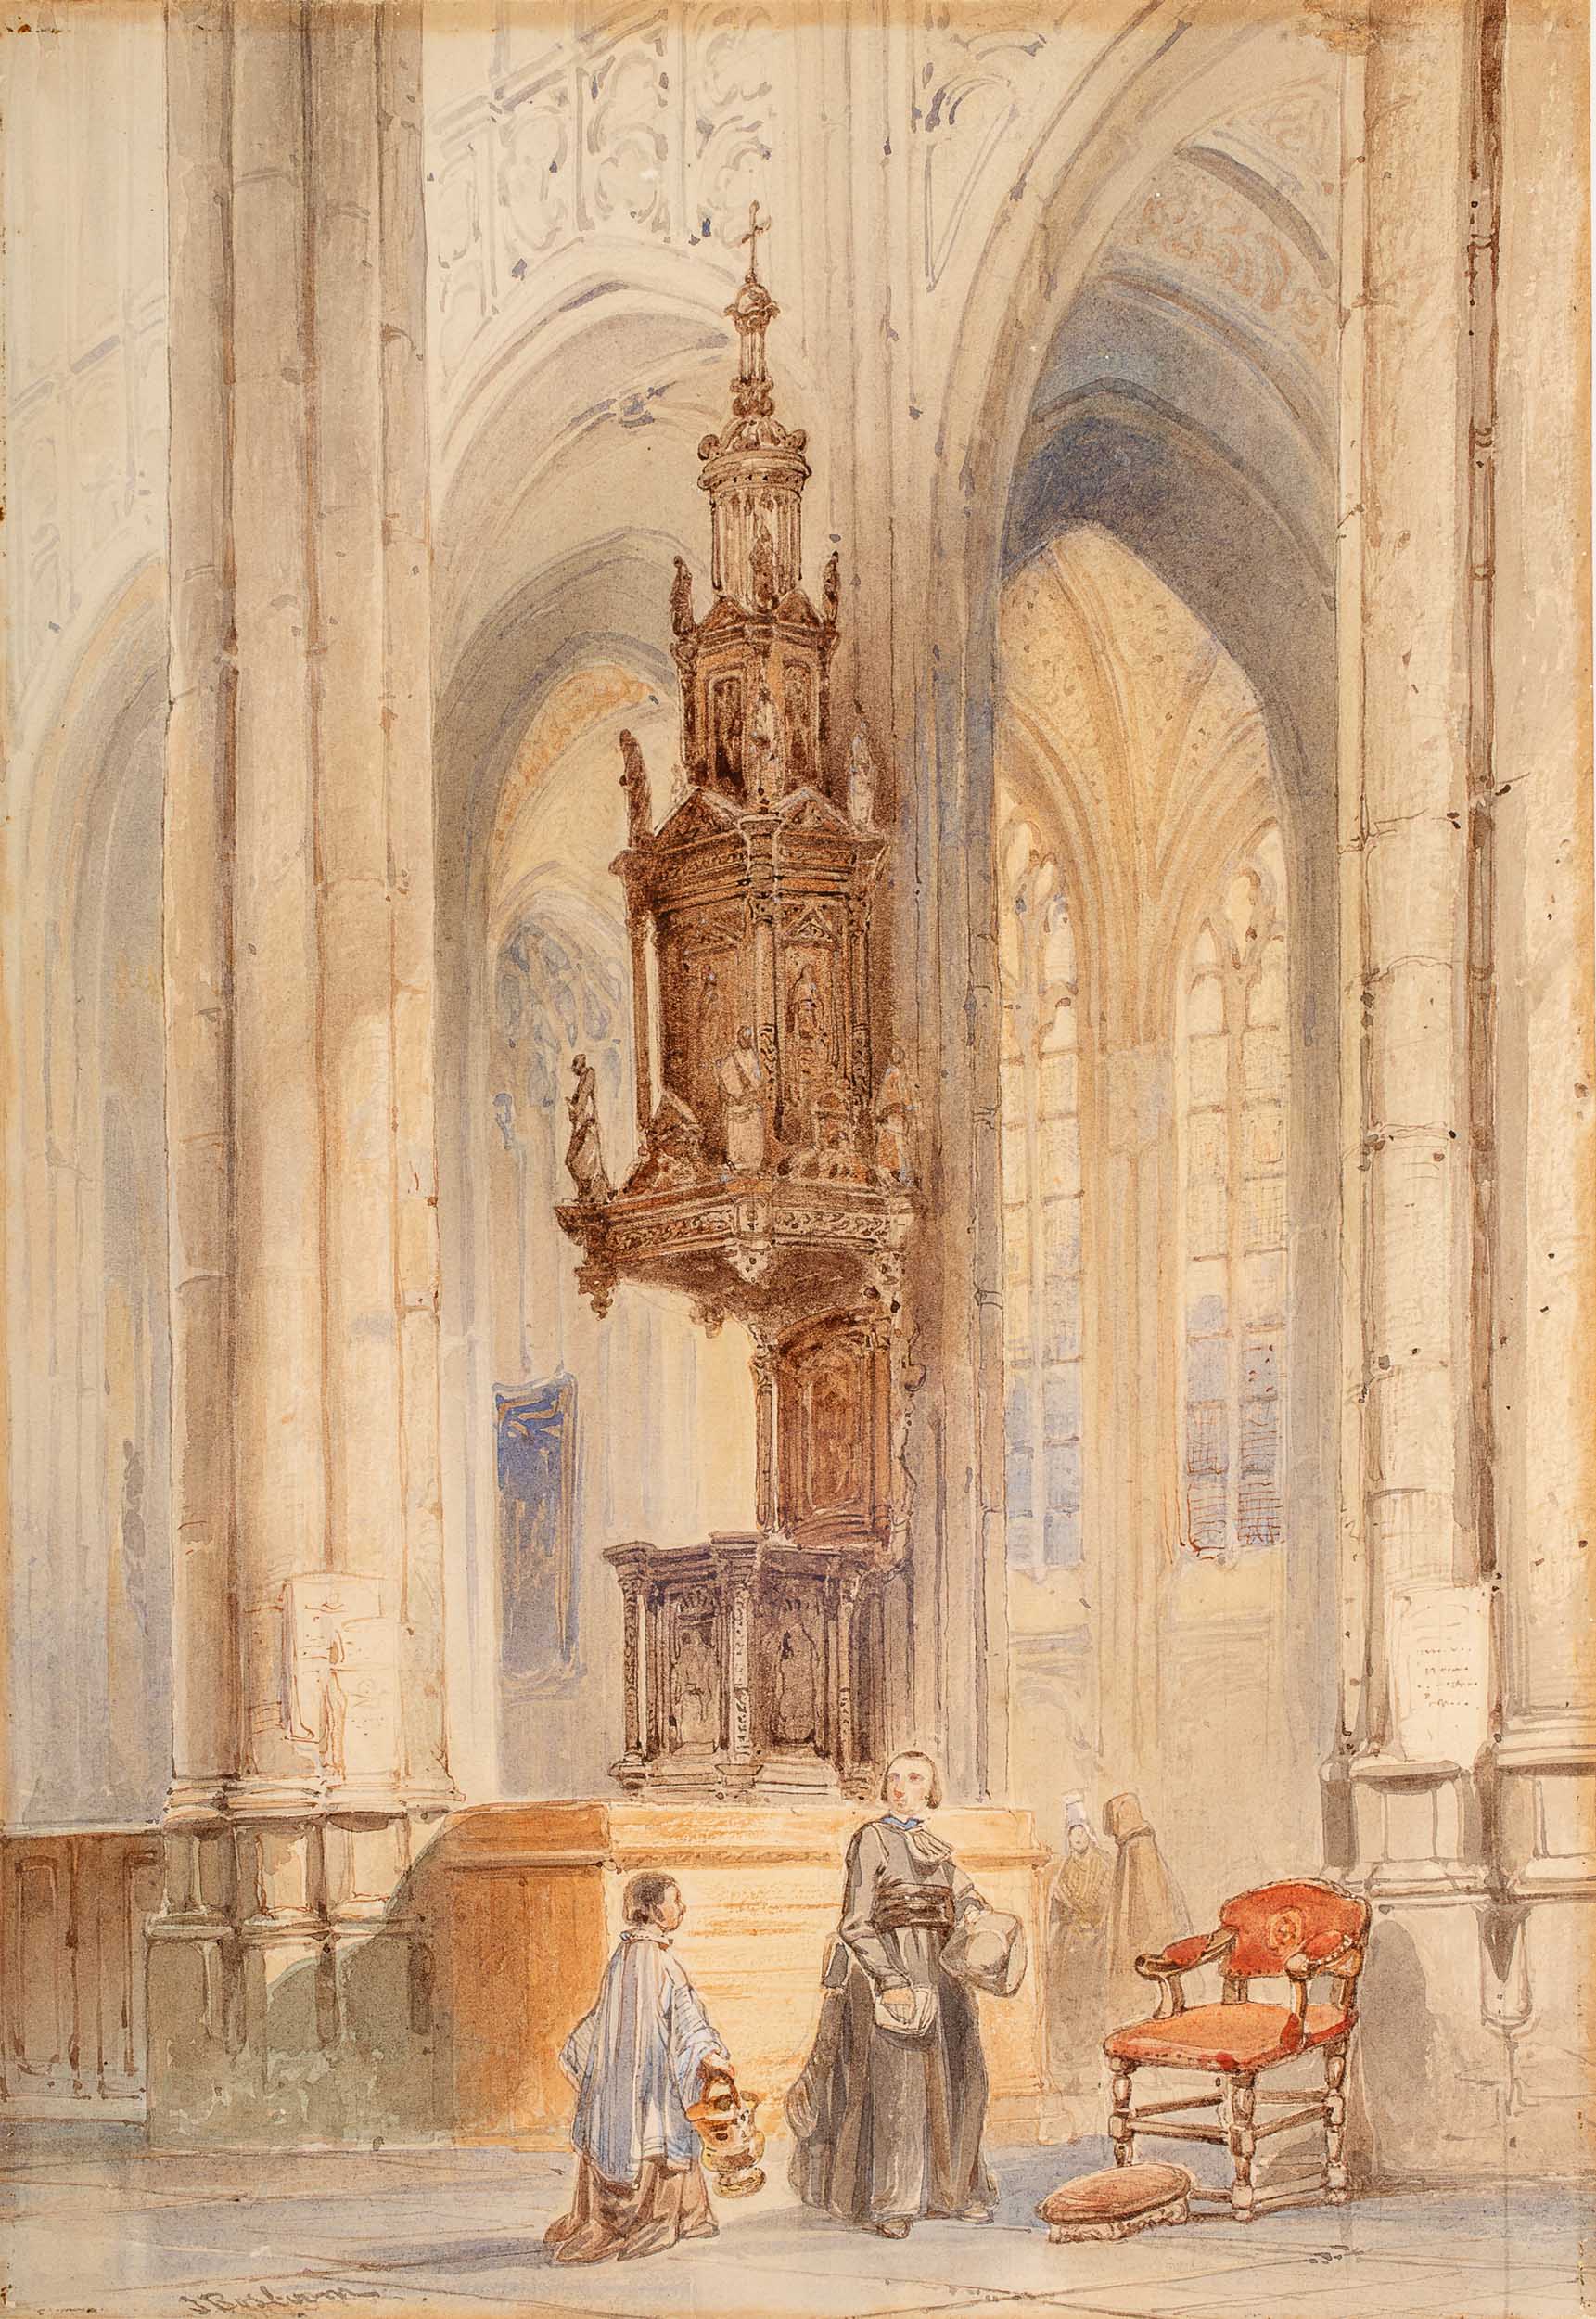 The cathedral of St. John in 's-Hertogenbosch